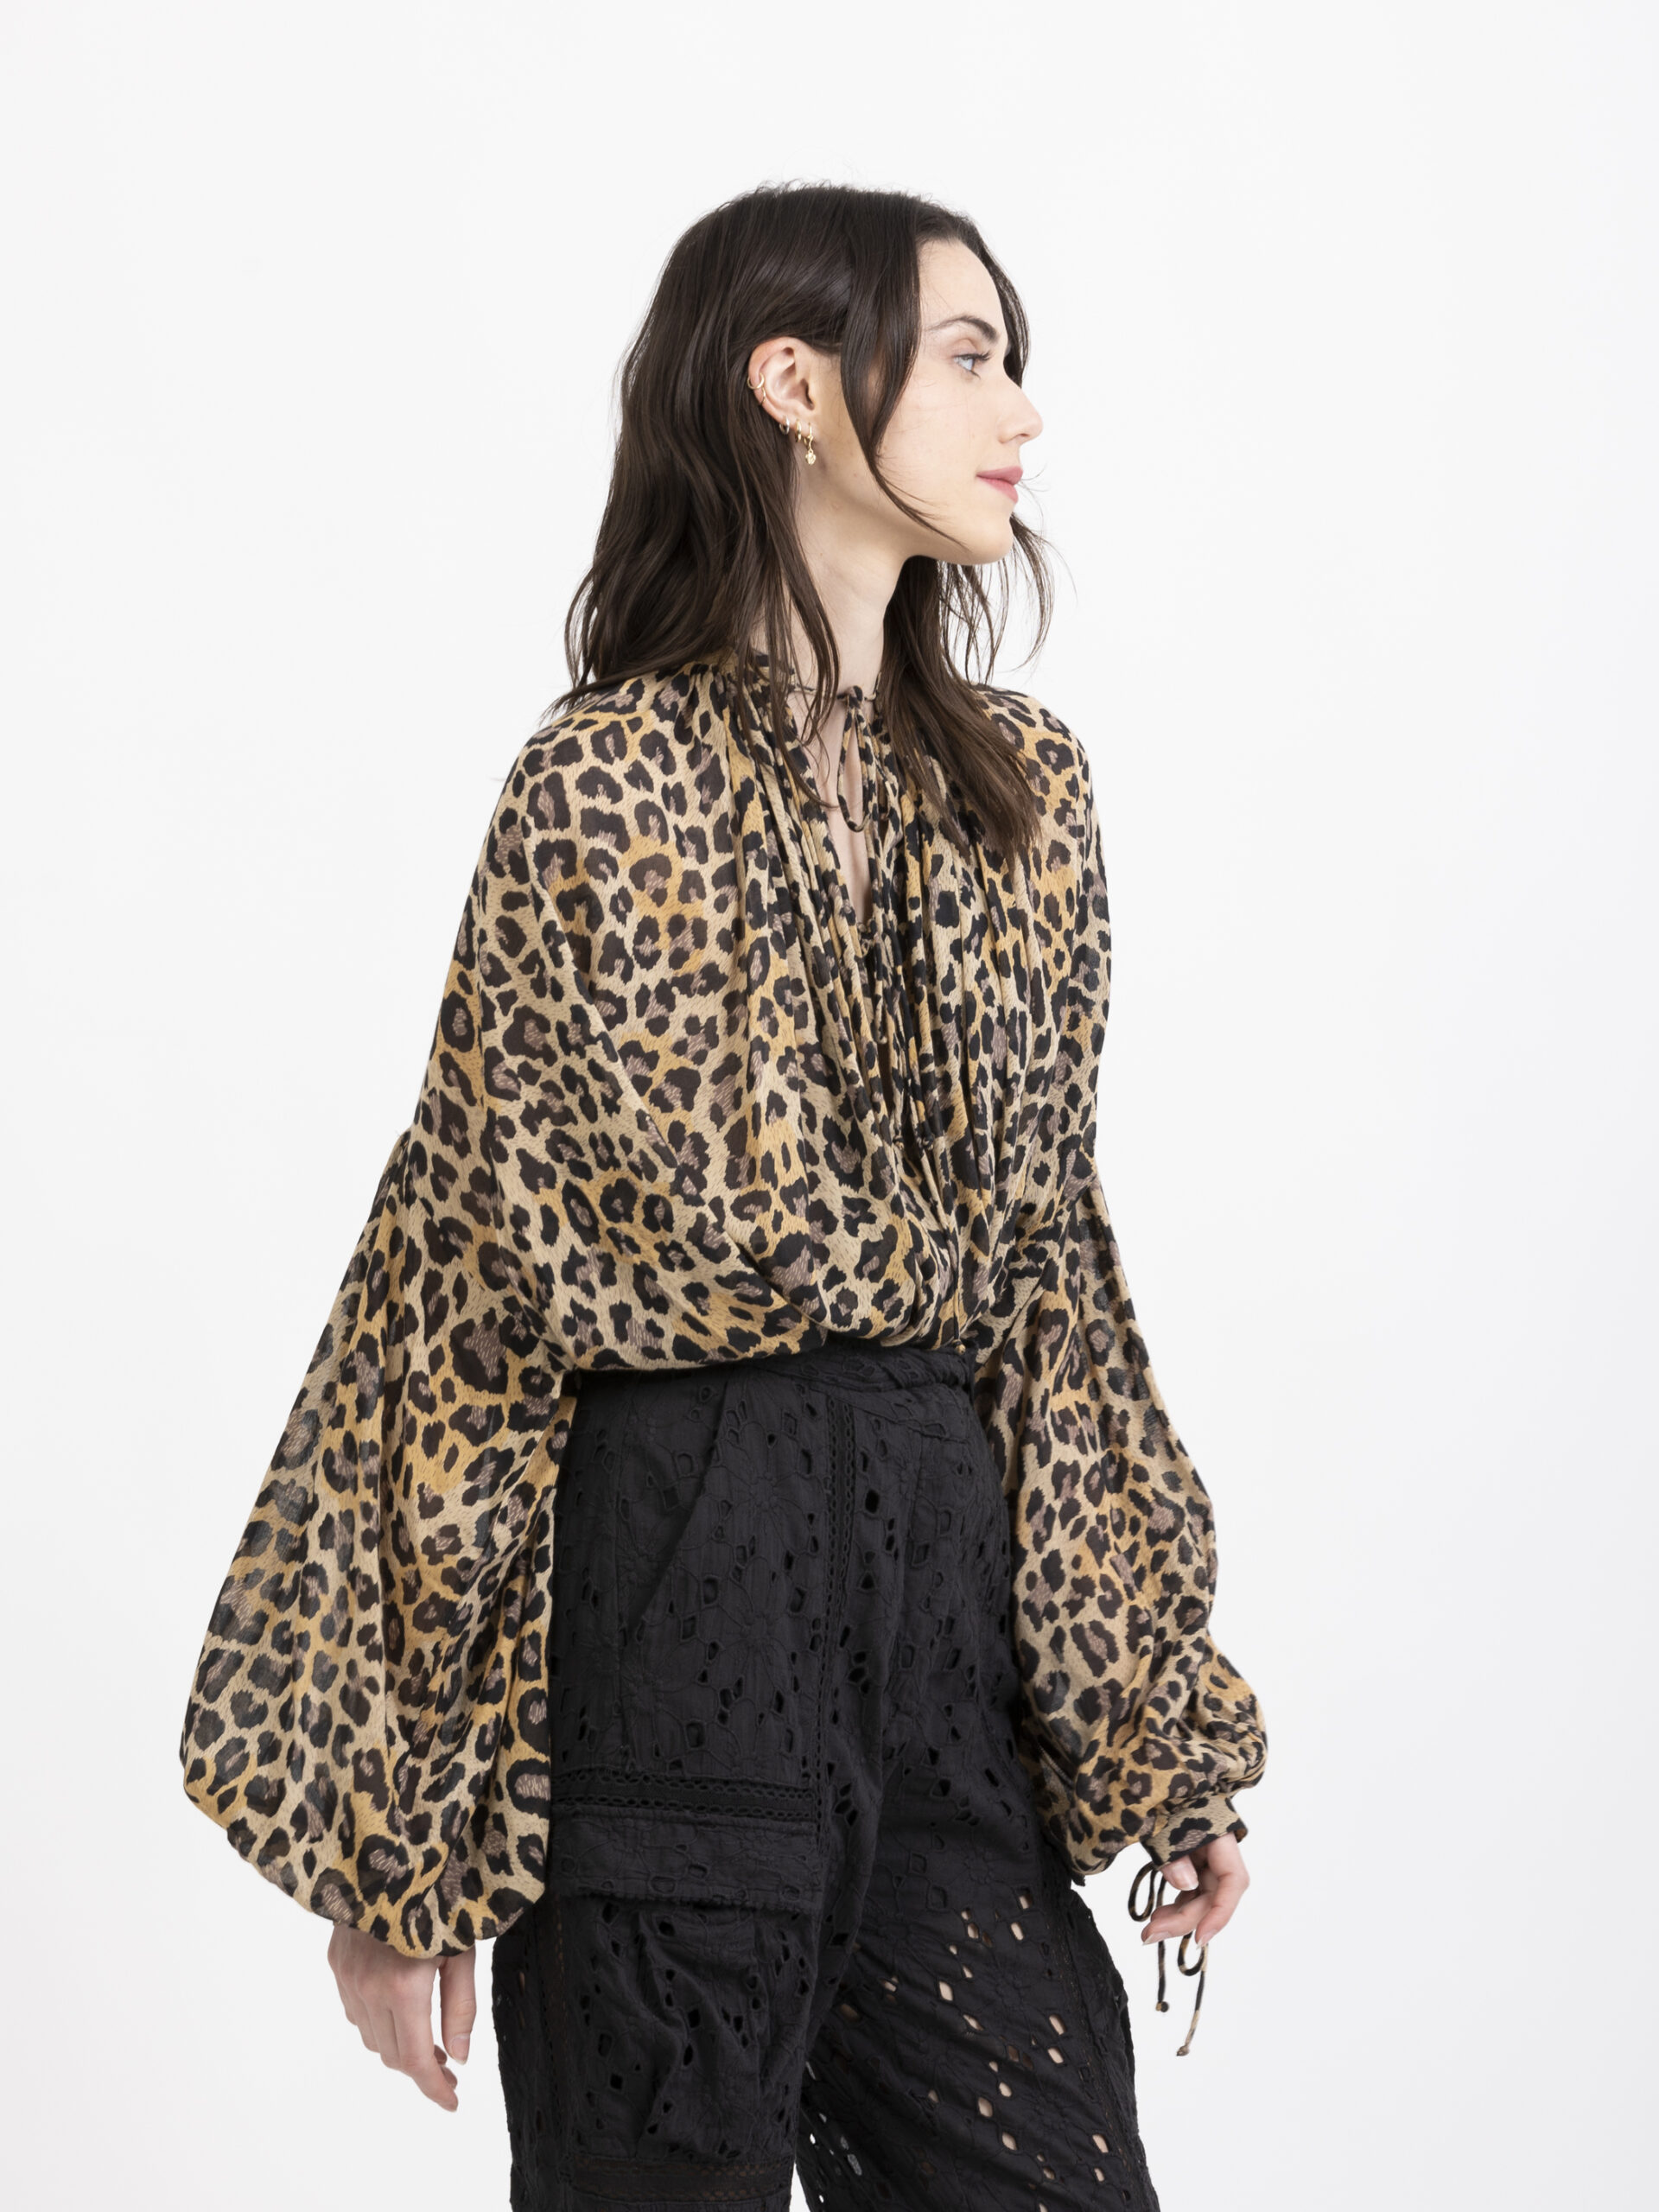 congo-leopard-print-blouse-flowing-puffy-sleeves-laurence-bras-matchboxathens